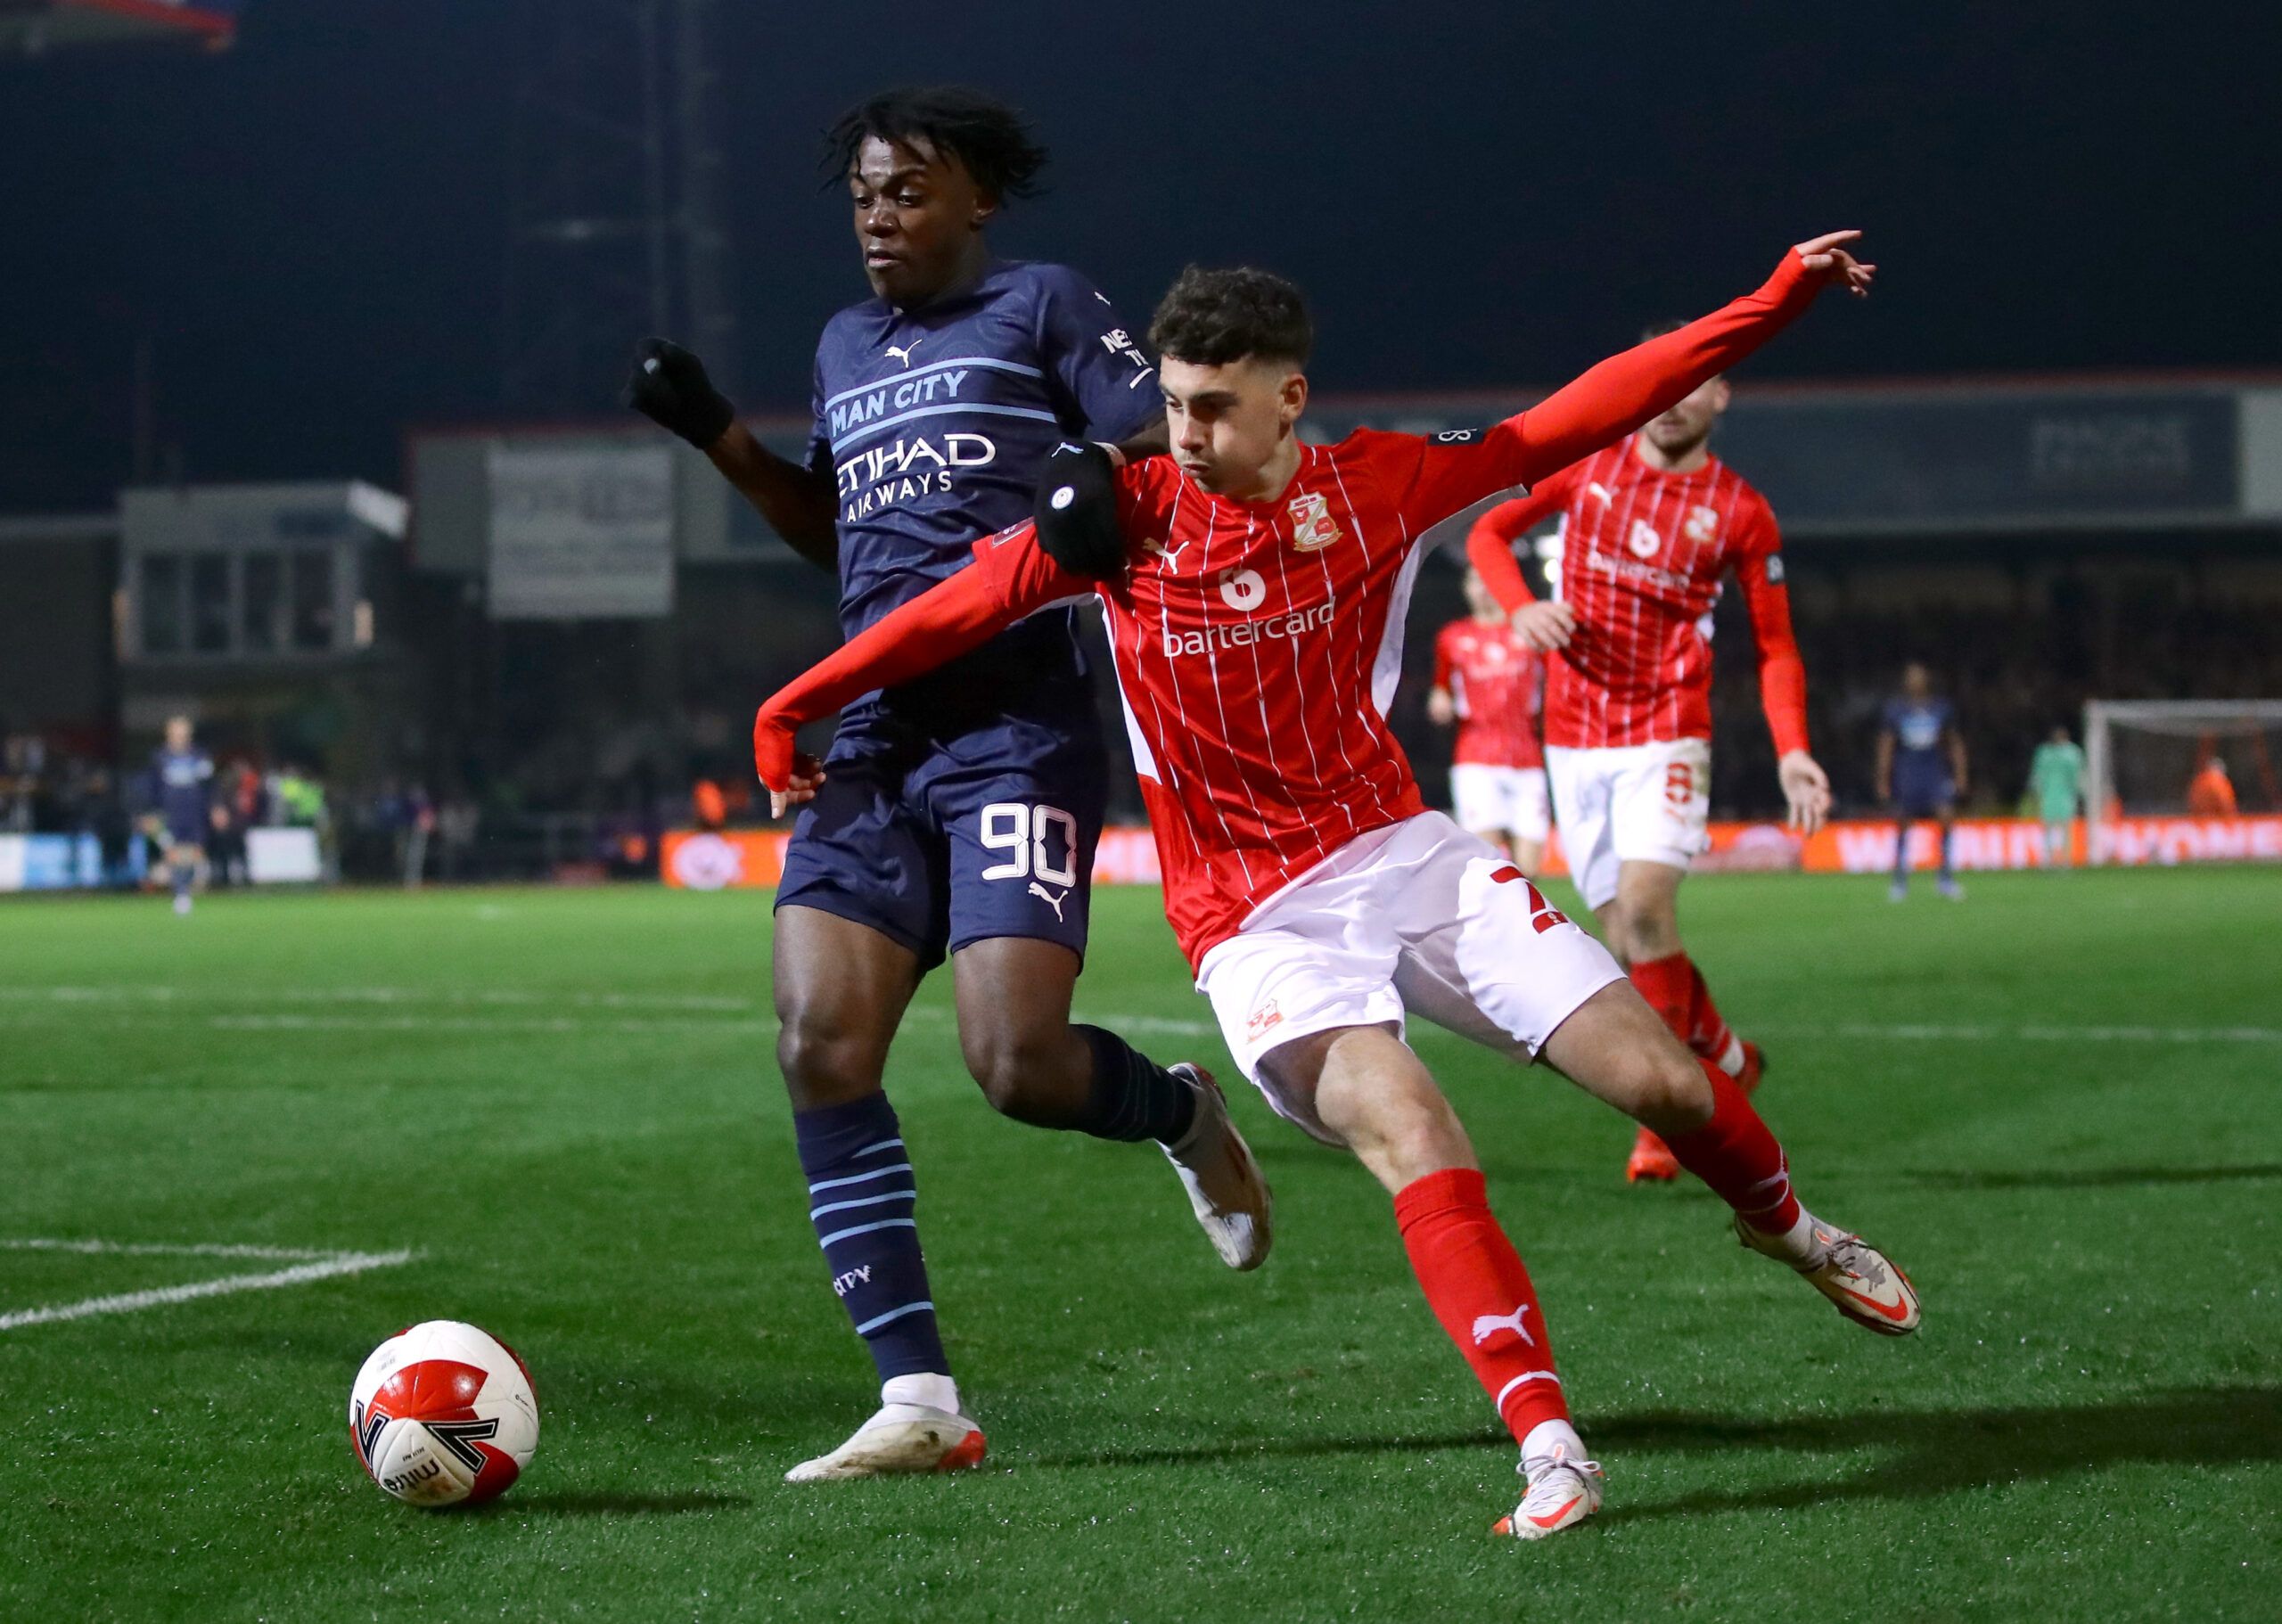 Soccer Football - FA Cup Third Round - Swindon Town v Manchester City - County Ground, Swindon, Britain - January 7, 2022 Manchester City's Romeo Lavia in action with Swindon Town's Ryan East REUTERS/David Klein